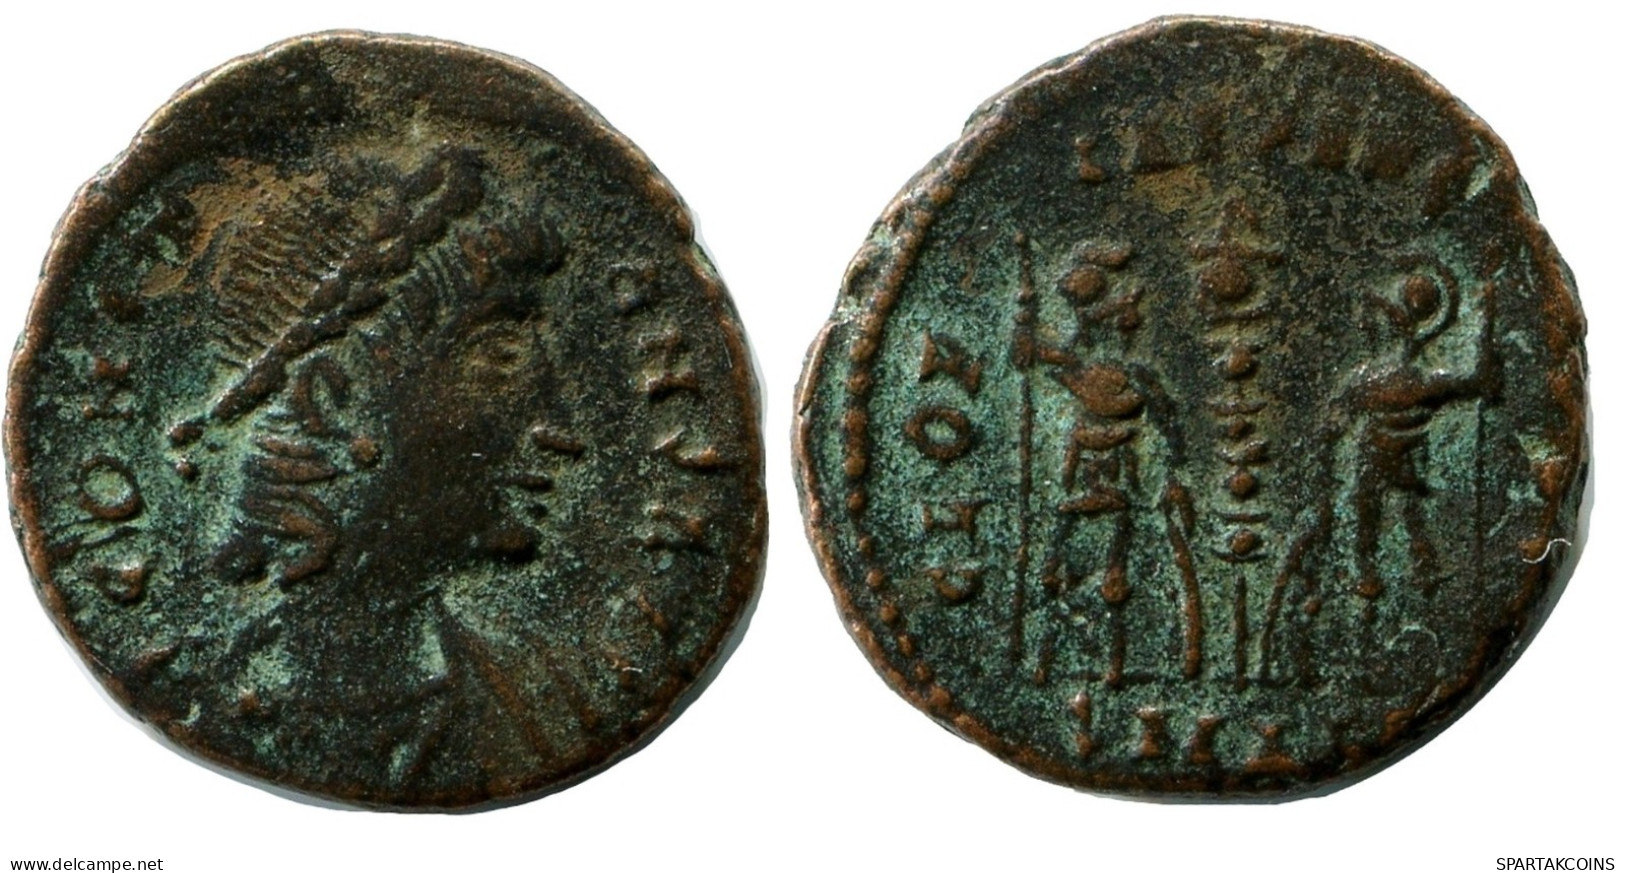 CONSTANS MINTED IN ALEKSANDRIA FROM THE ROYAL ONTARIO MUSEUM #ANC11357.14.E.A - L'Empire Chrétien (307 à 363)